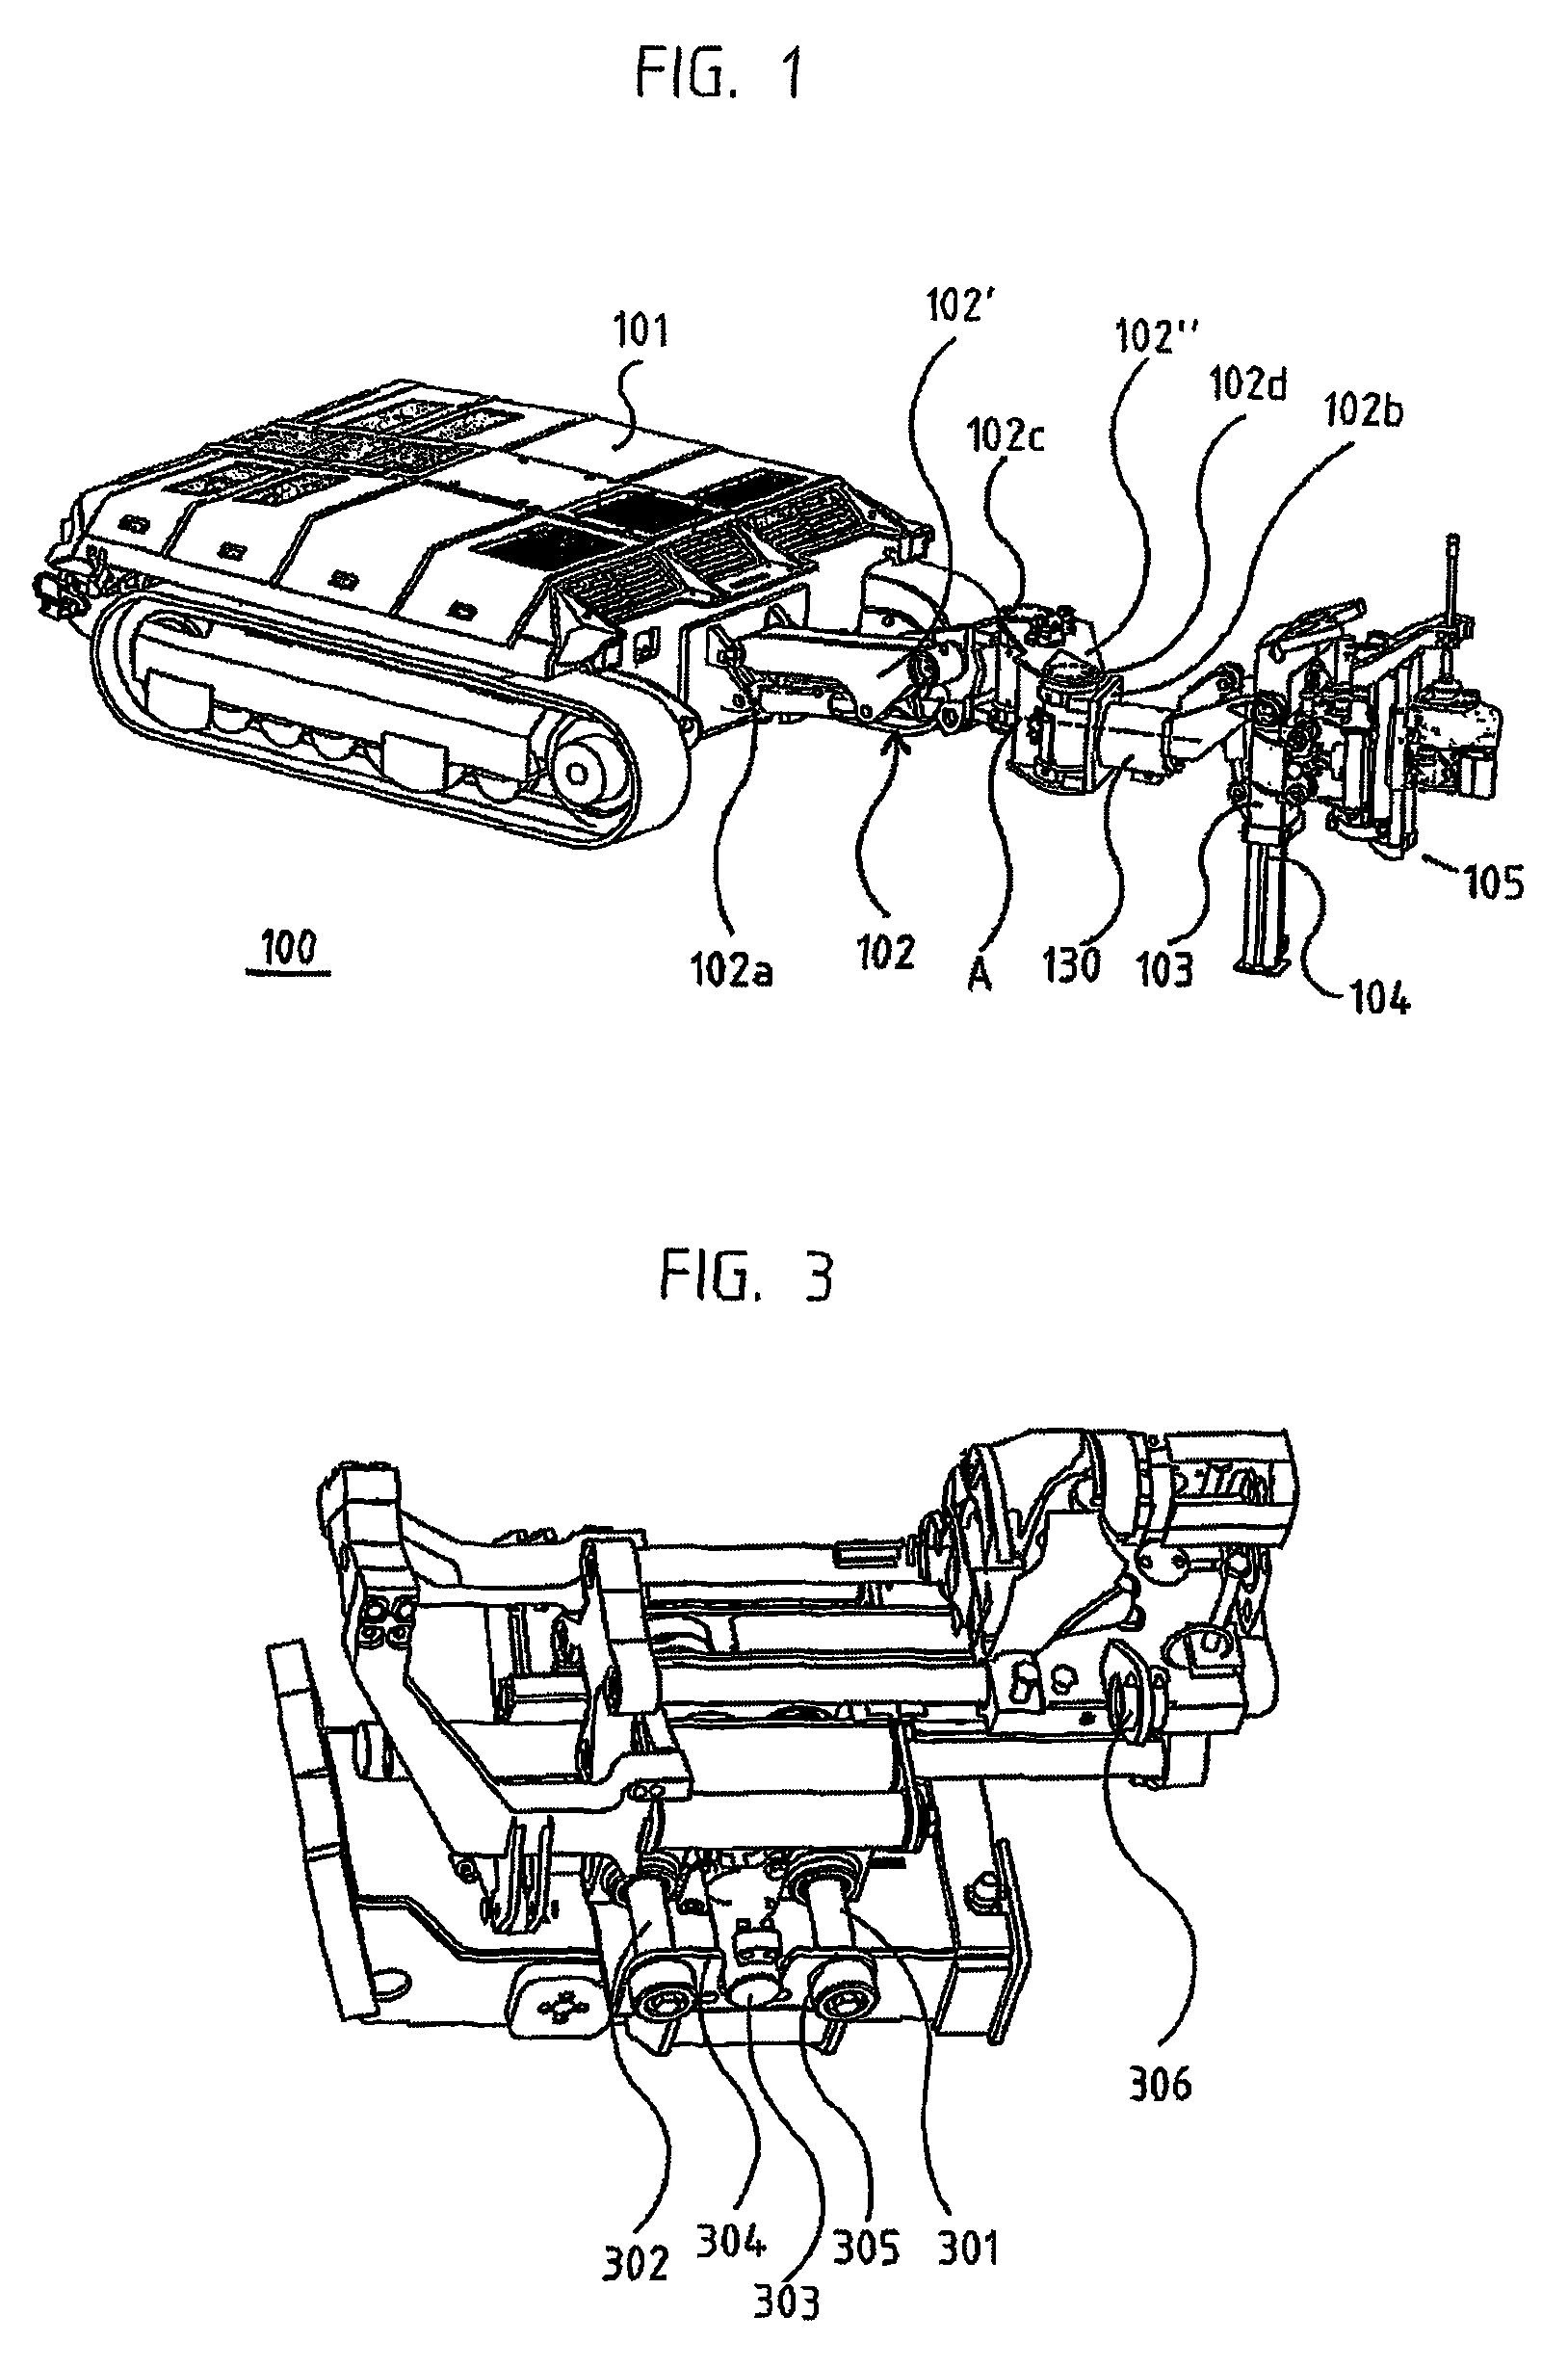 Rock drilling device